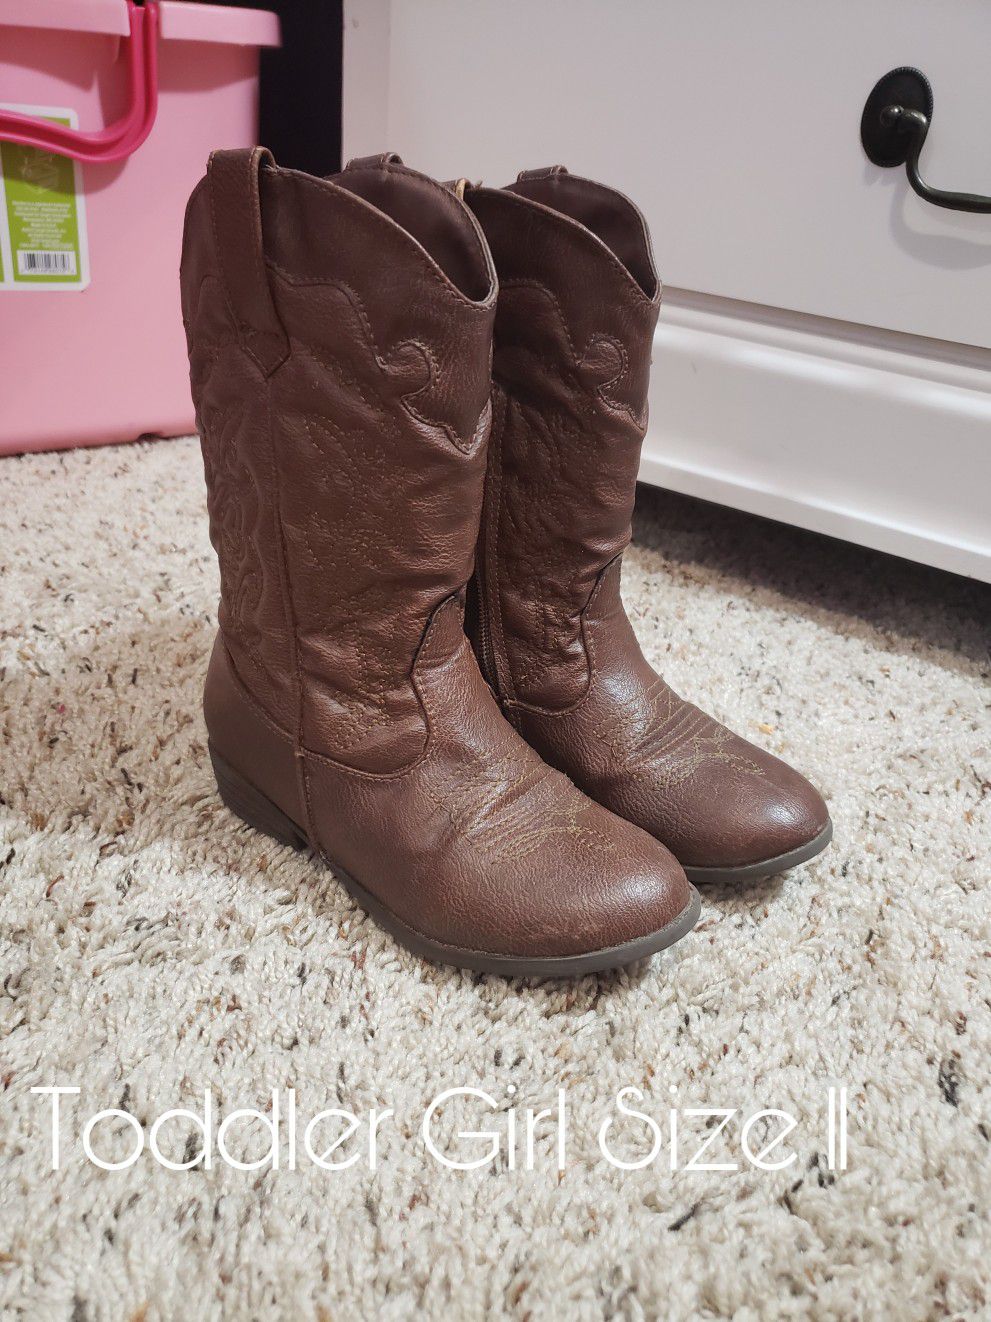 Toddler Girl Size 11 Boots